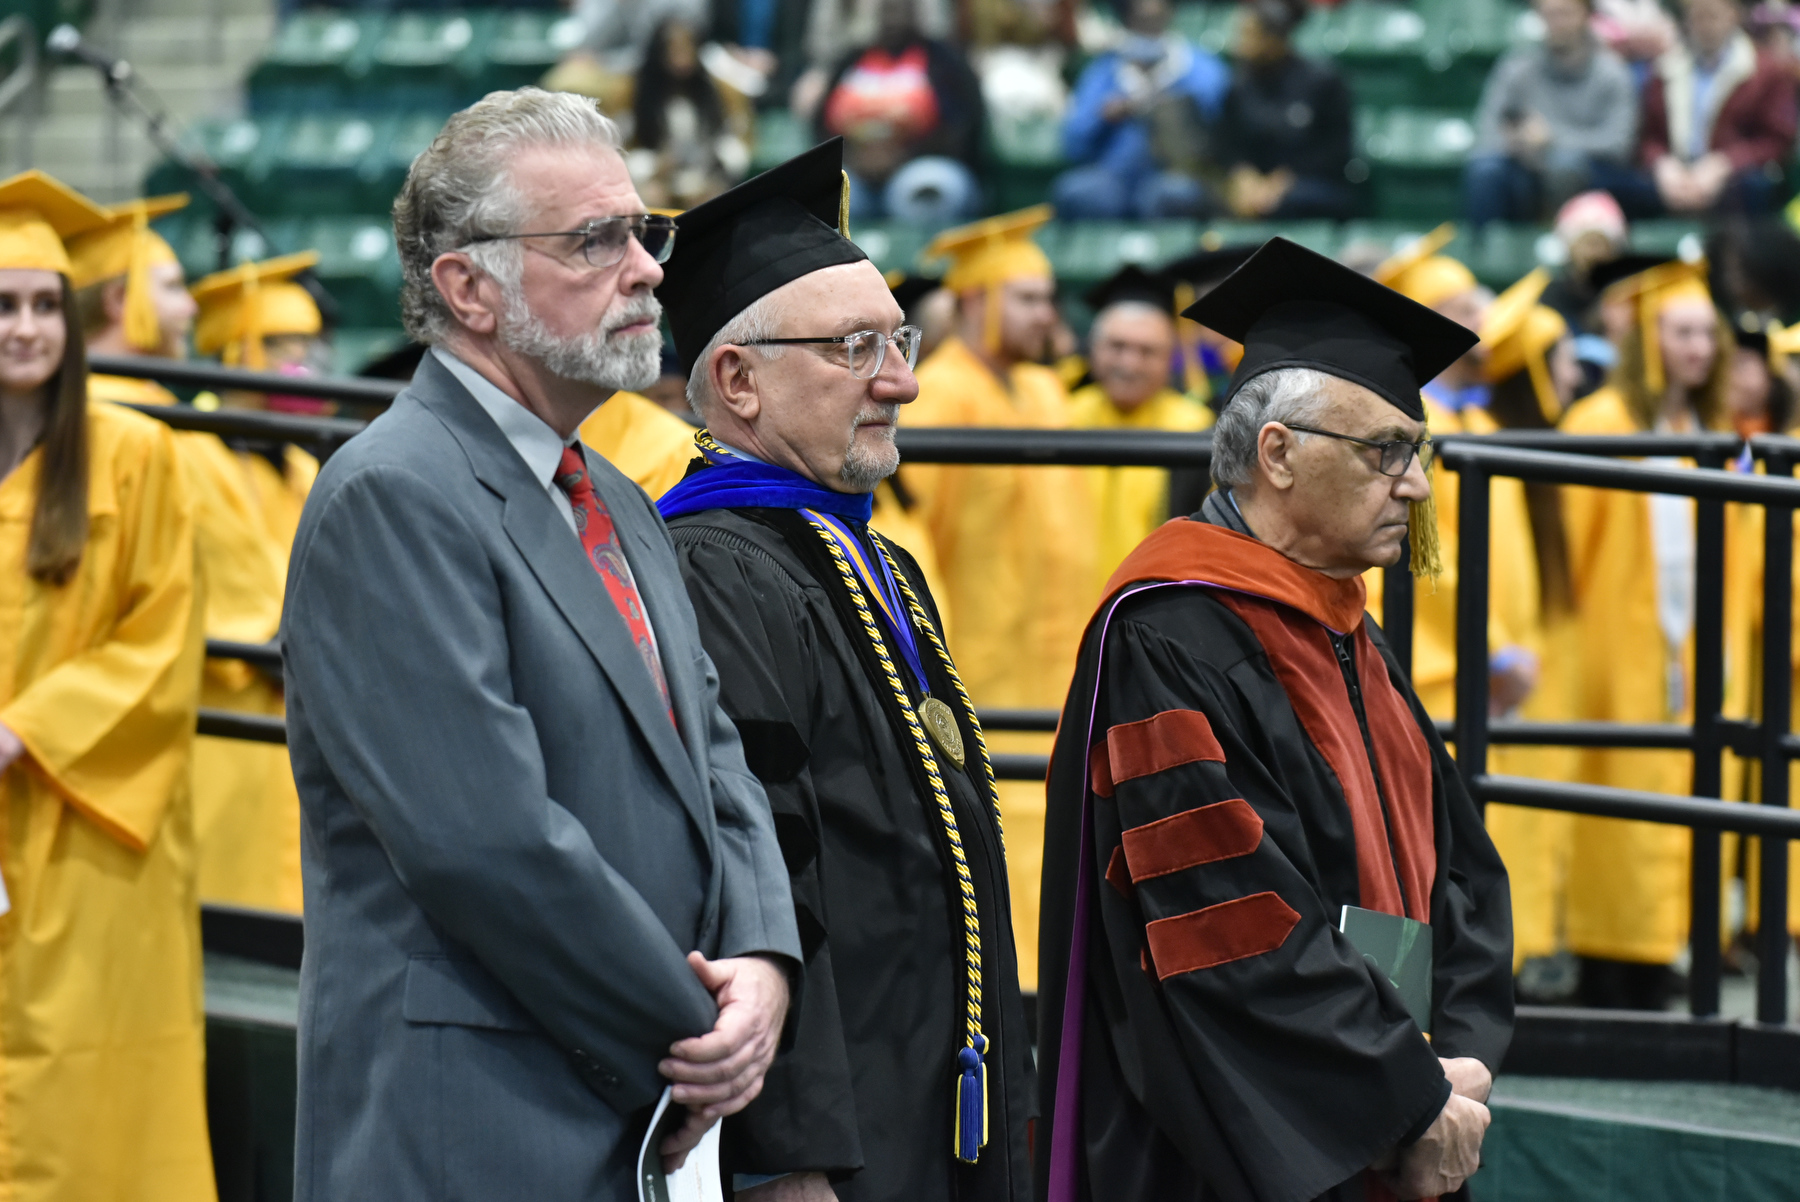 Retiring faculty and professional staff are honored at each Commencement. Pictured are Michael Pisa, Campus Technology Services; David Bozak, professor in computer science and psychology; and Said Atri, professor of economics.